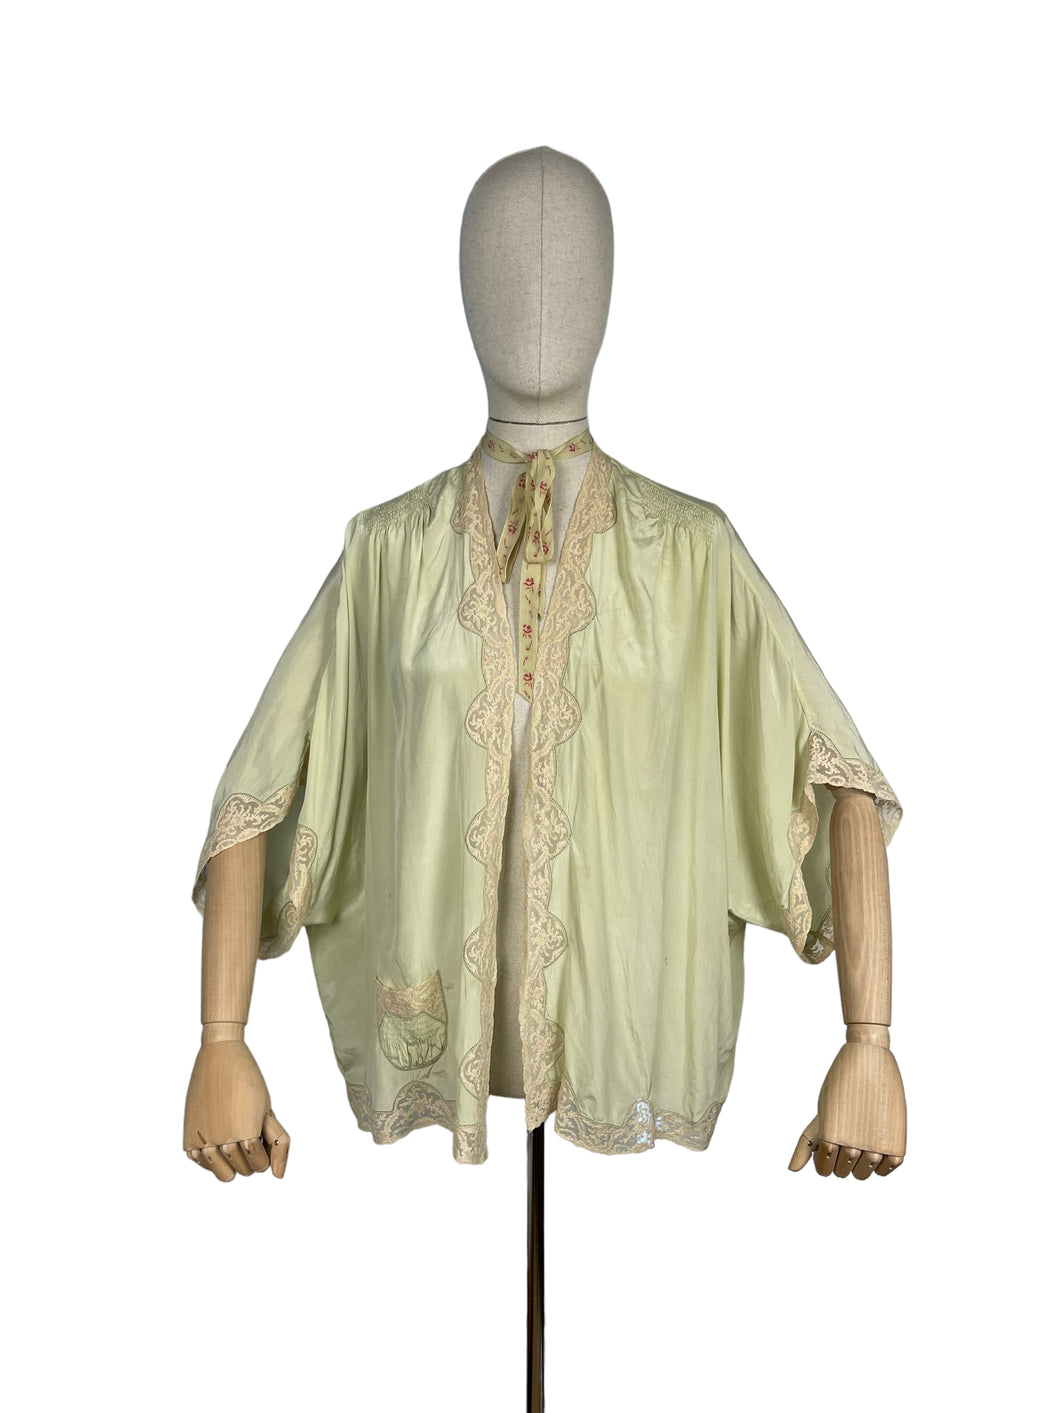 Original 1920's 1930's Bourne and Hollingsworth Pale Green Pure Silk Bed Jacket With Tambour Lace Detail and Ribbon Tie - Bust 34